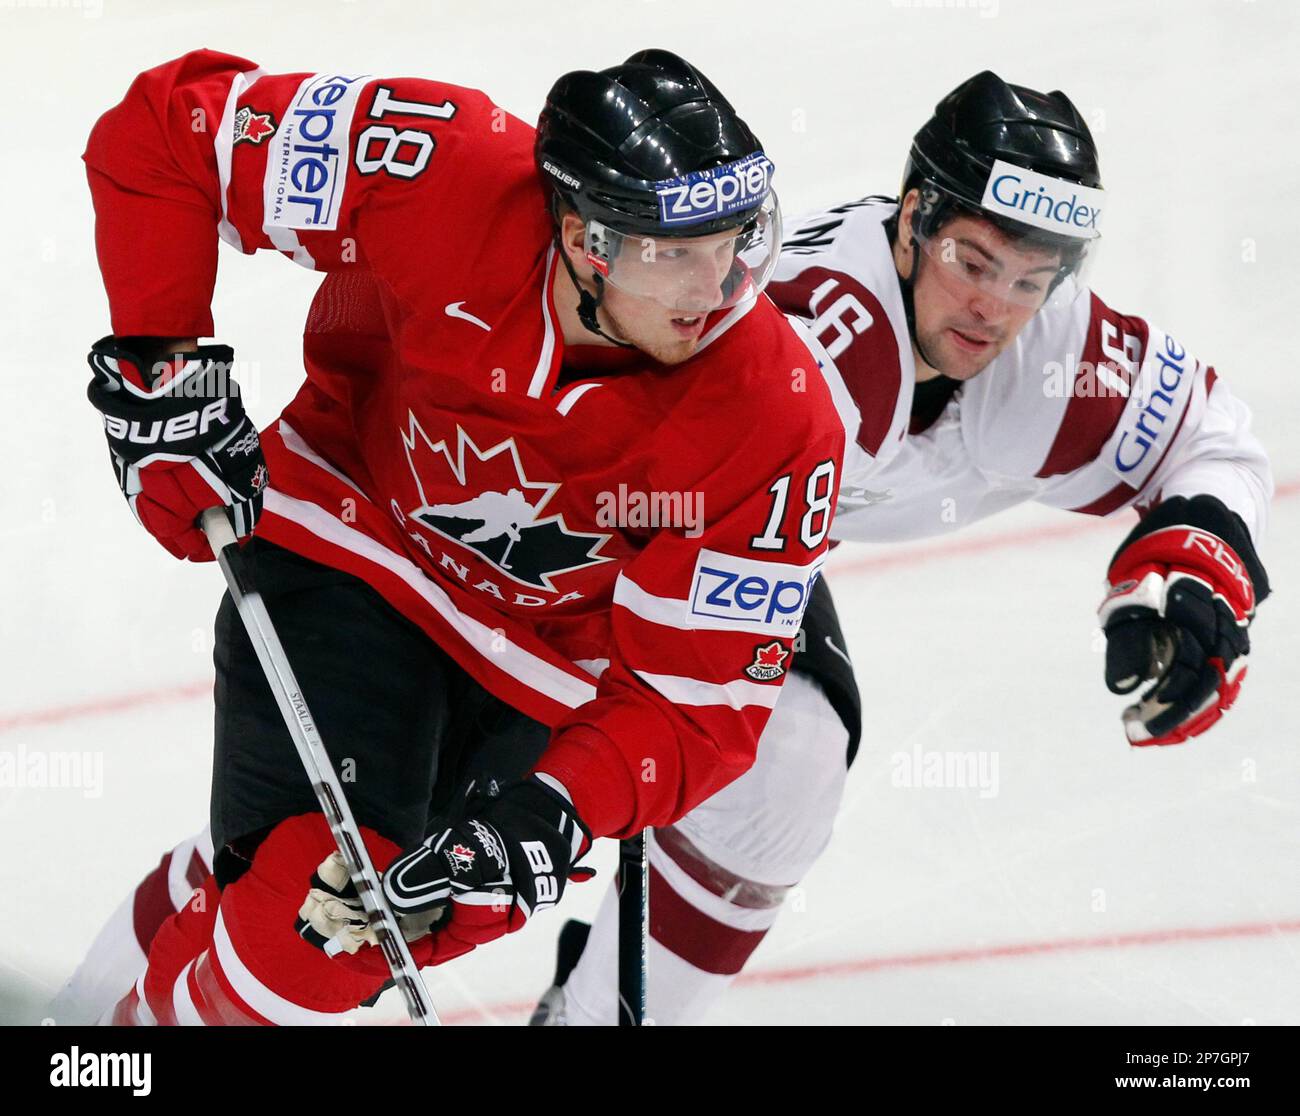 Team Canadas Marc Staal, left, and Latvias Kaspars Daugavins battle for position during first period action at the IIHF world hockey championship in Mannheim, Germany, Monday May 10, 2010